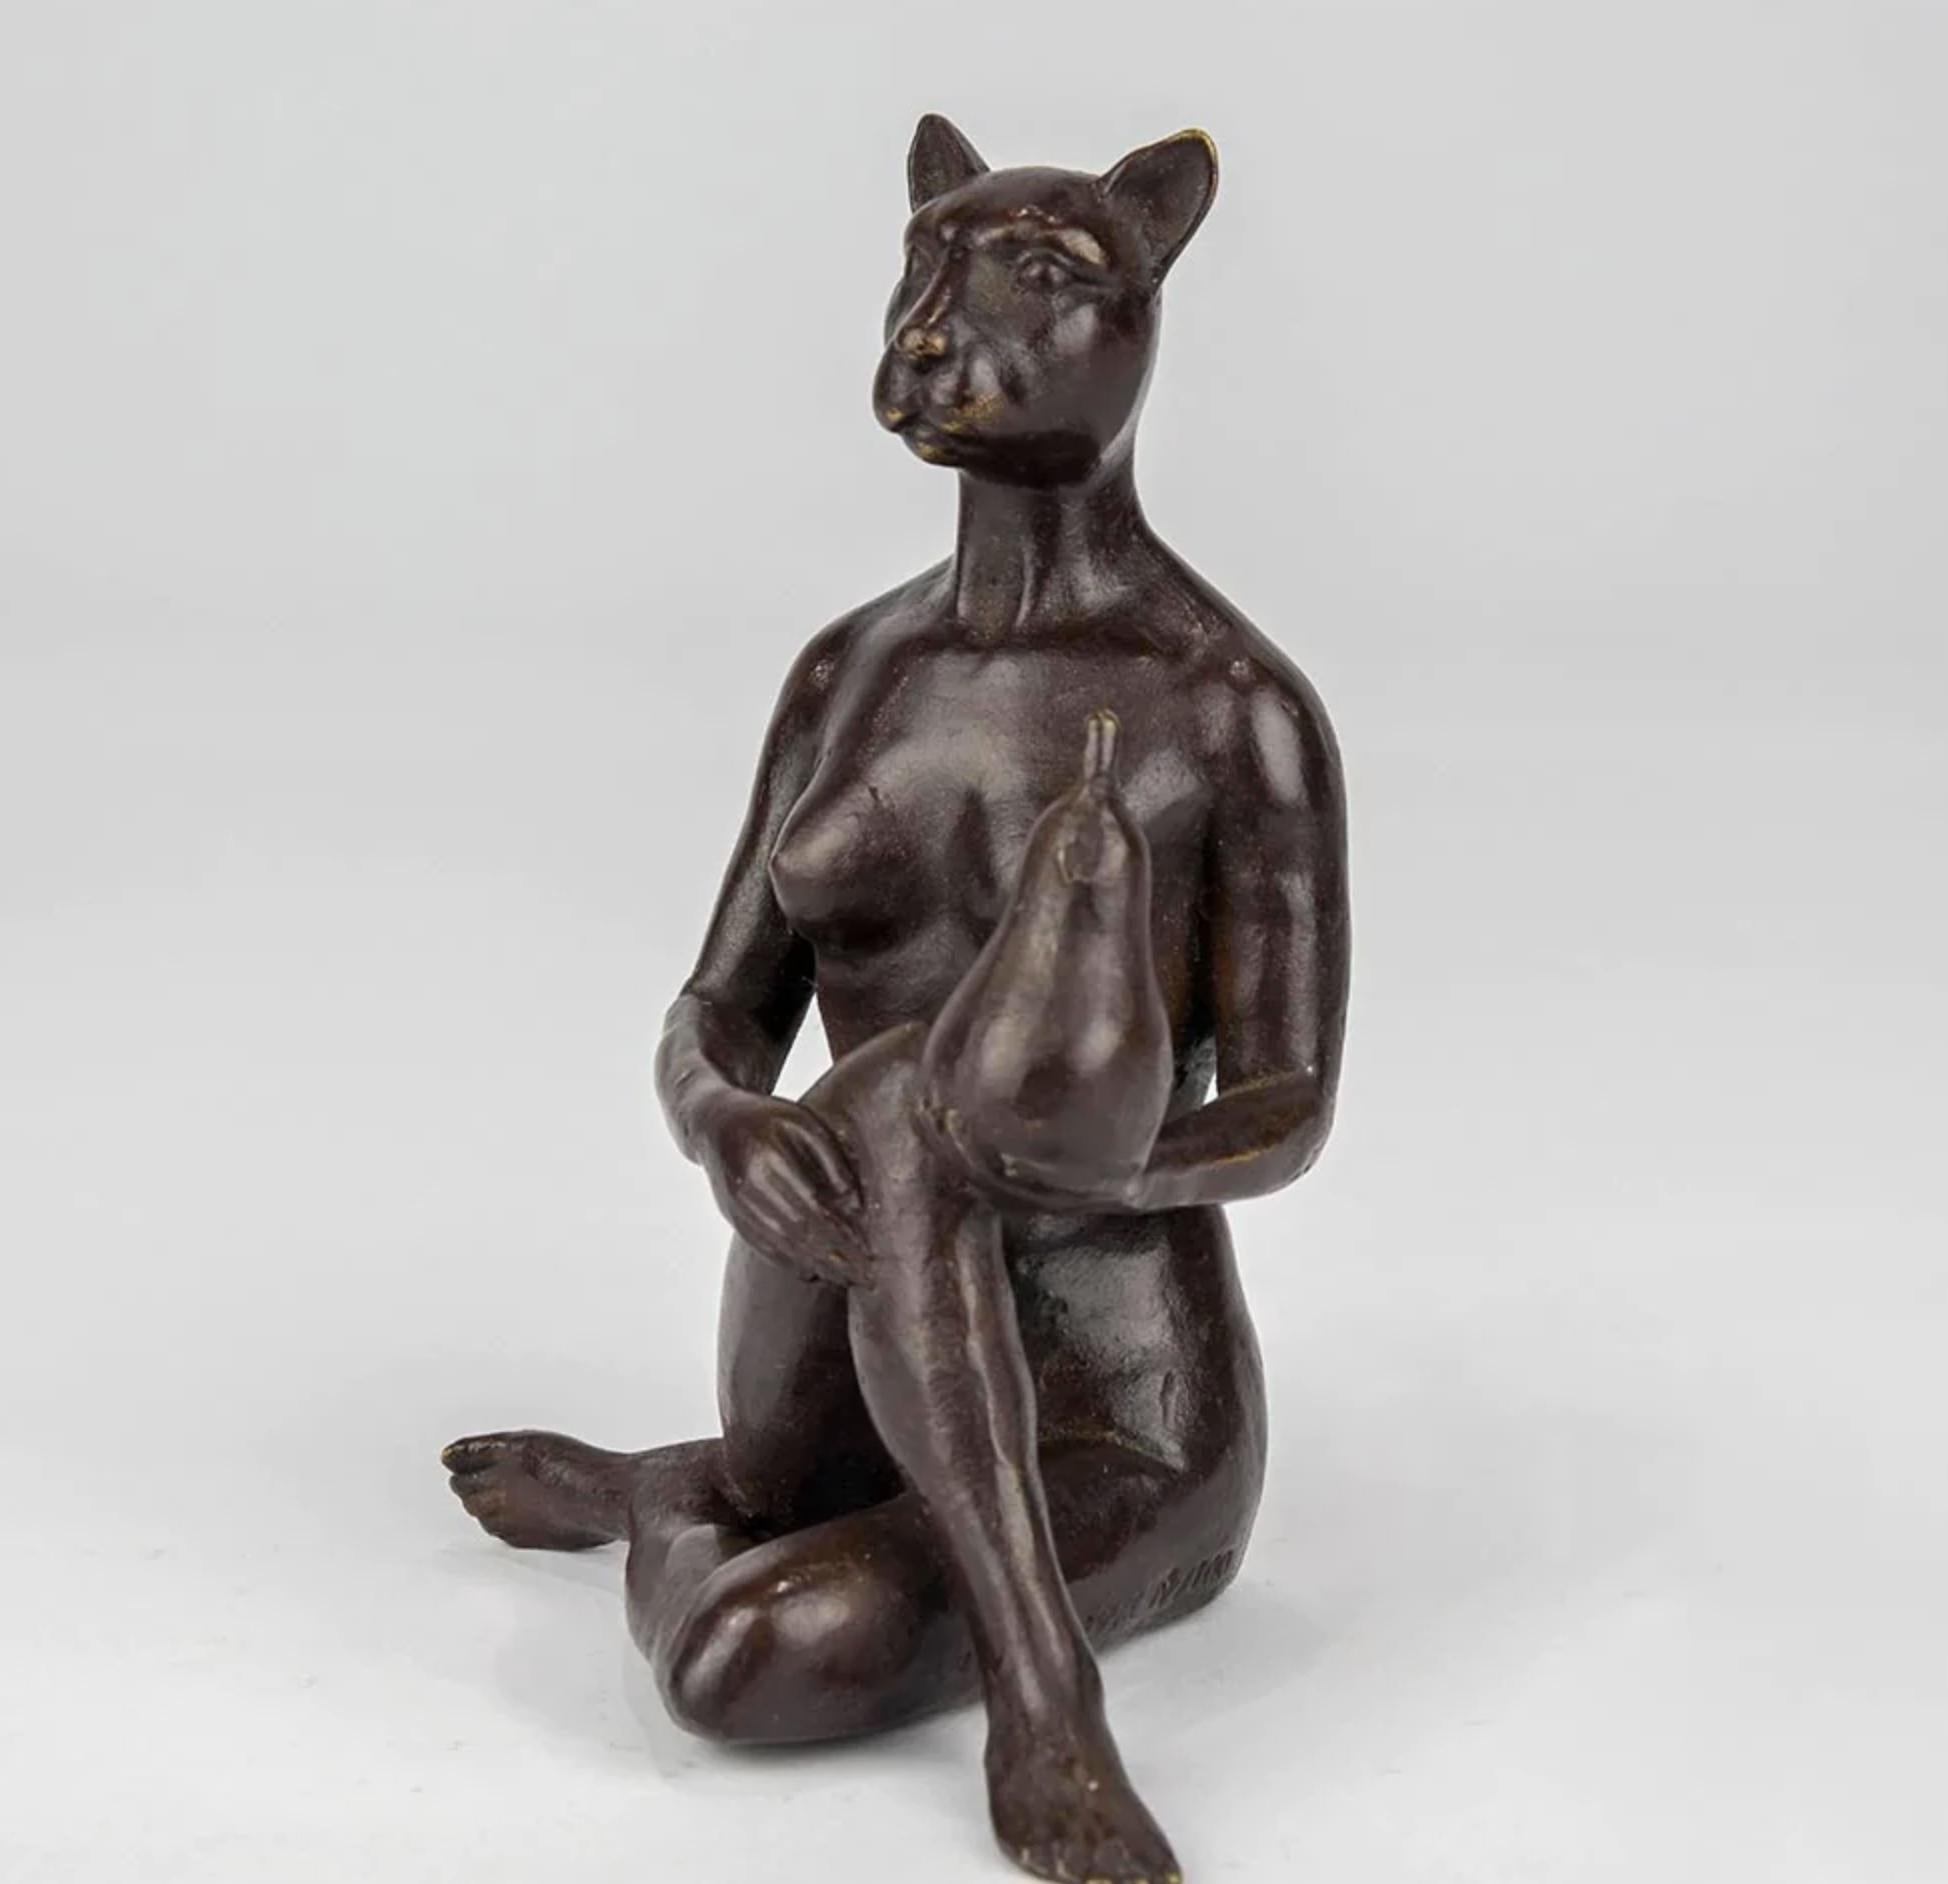 Authentic Bronze The Pearfect Cat Sculpture by Gillie and Marc - Contemporary Art by Gillie and Marc Schattner